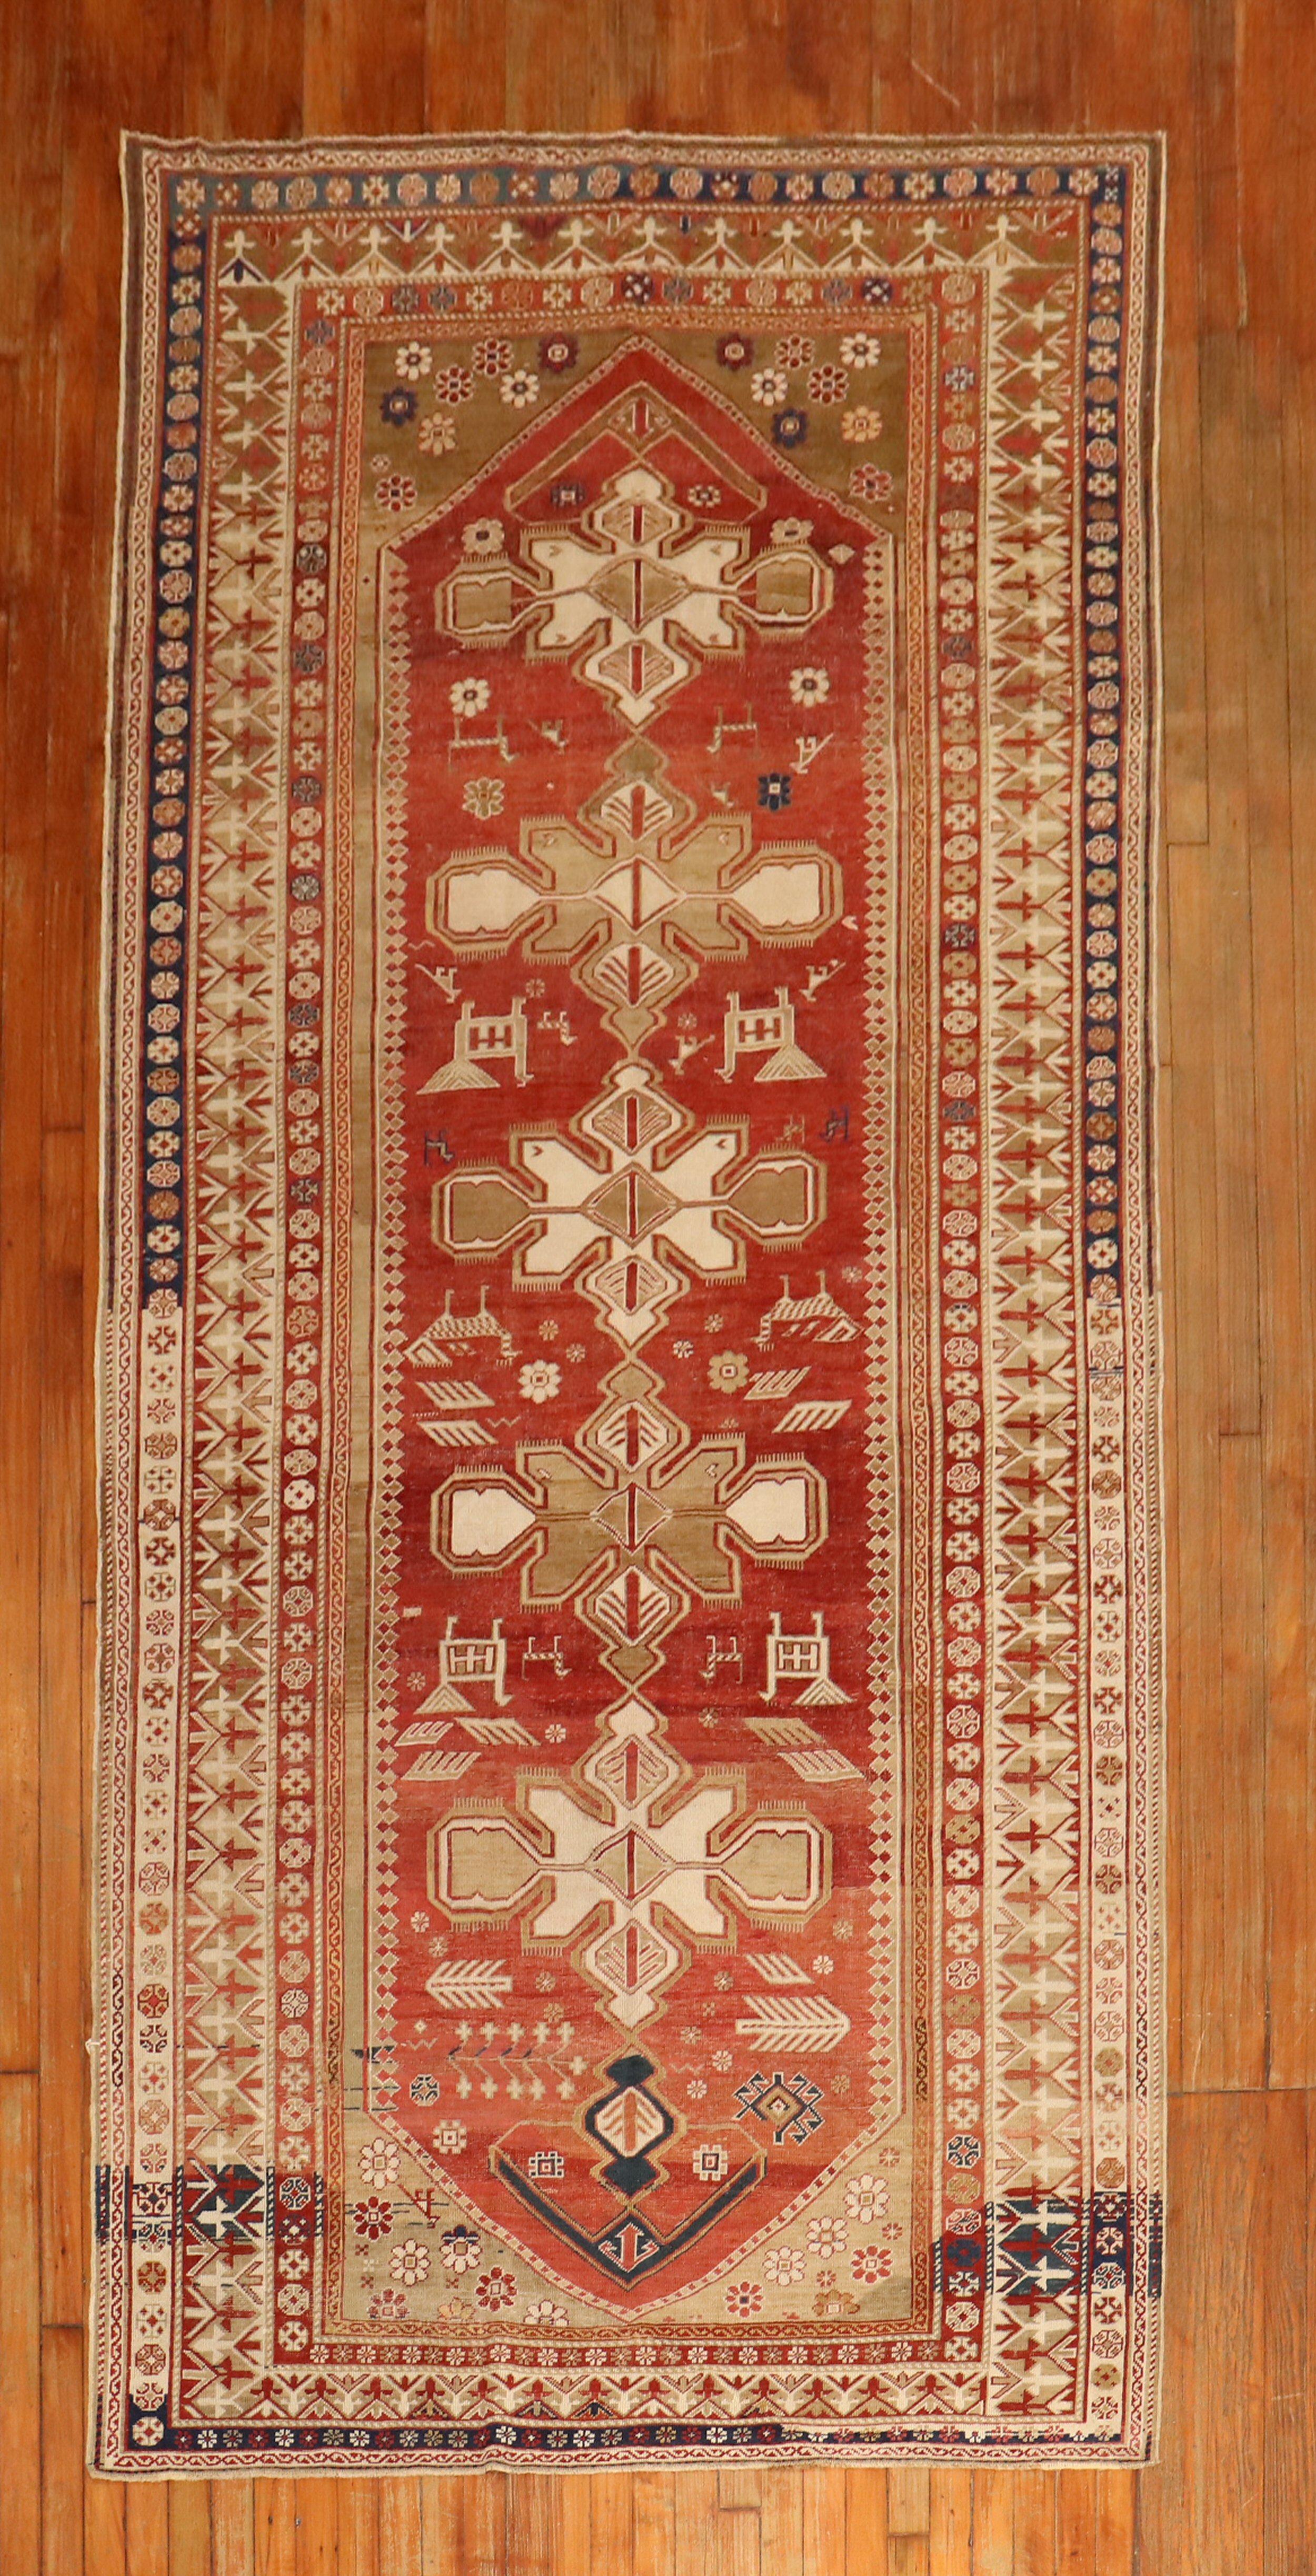 Geometric Tribal Caucasian Shirvan rug

Measures: 4'10” x 10'9”

Antique Caucasian rugs from the Shirvan district village are still considered one of the best decorative and collector type of rugs from that the Caucasian regions/villages.